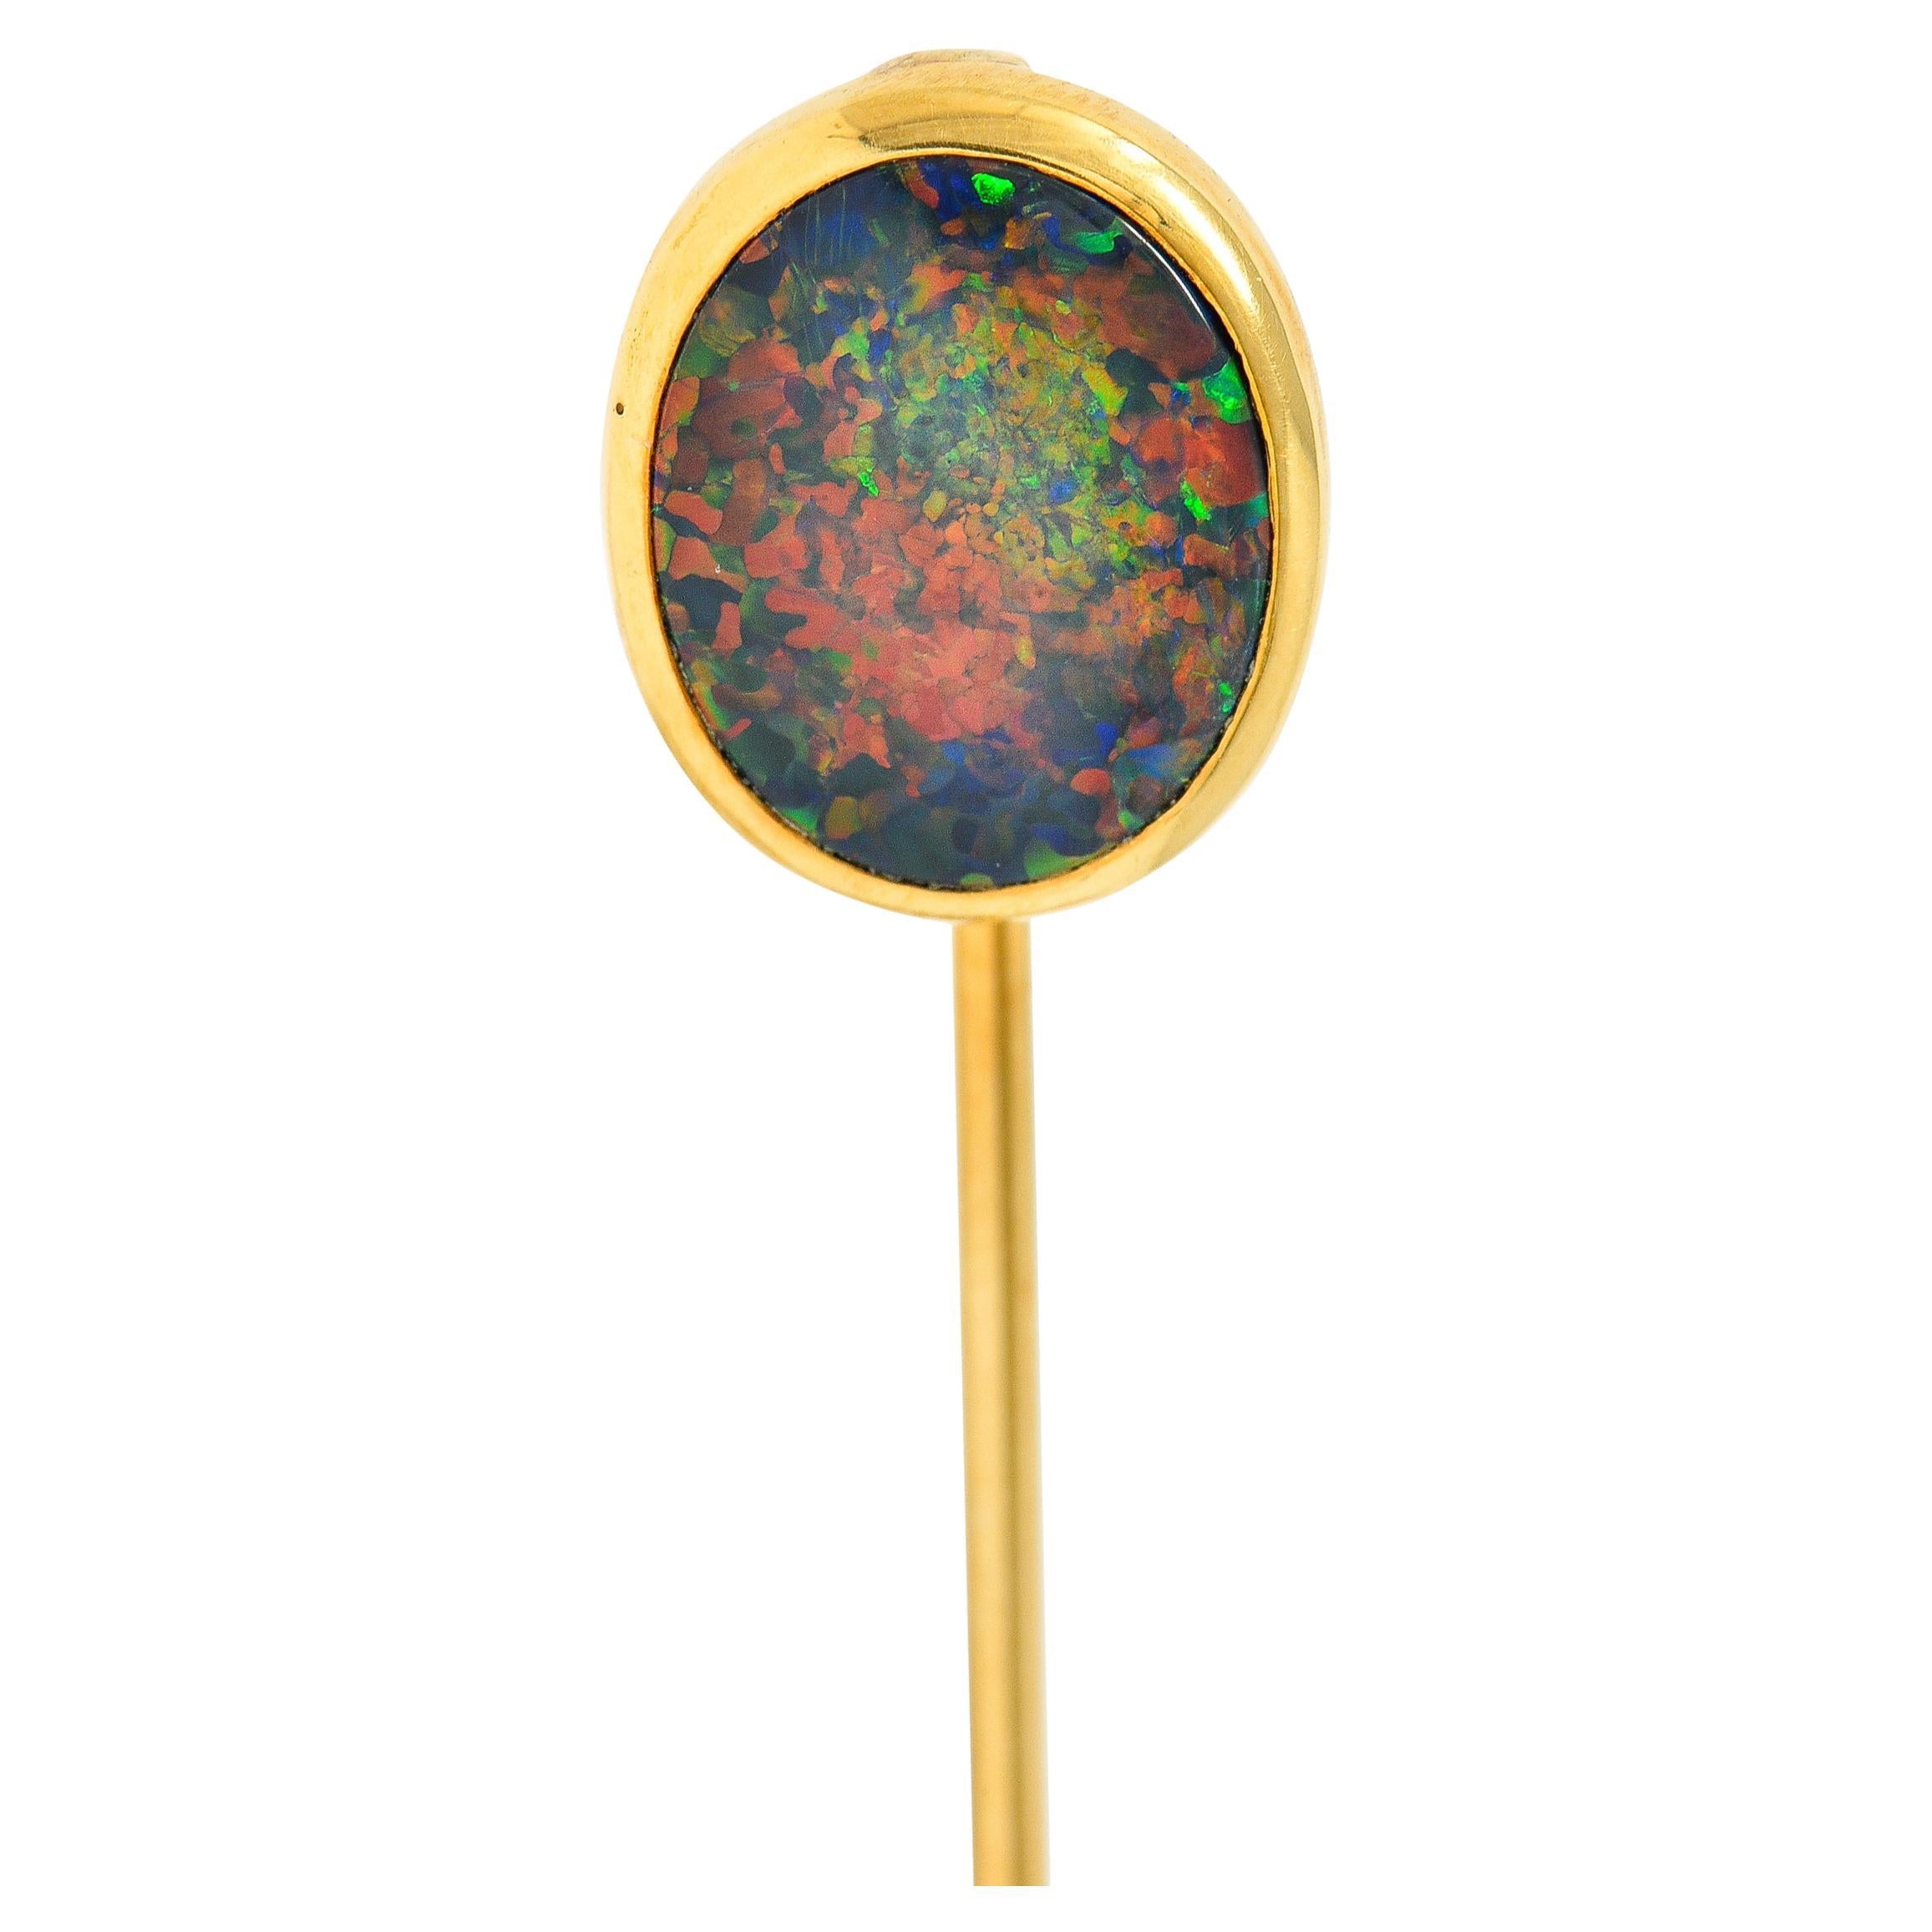 Featuring an oval black opal double cabochon measuring approximately 10.9 x 9.5 mm

Opaque dark gray body color with very strong spectral play-of-color

Bezel set in a polished gold surround

Tested as 18 karat gold

Circa: 1900

Head measures: 1/2